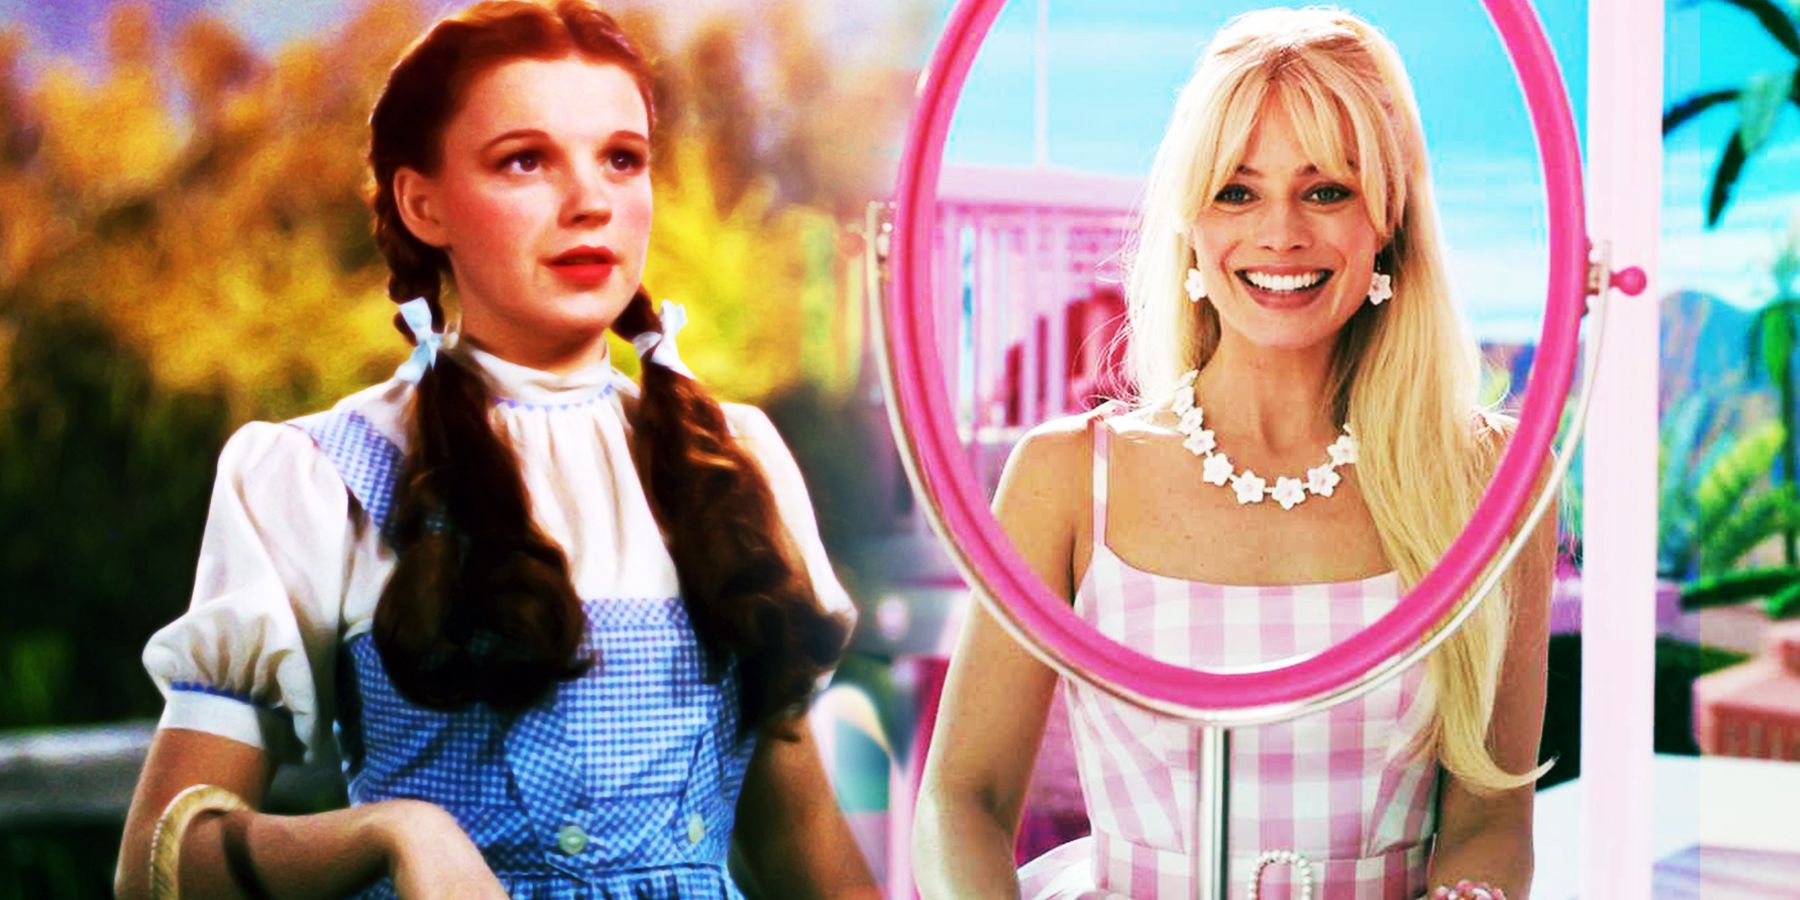 On the right, Judy Garland as Dorothy from 'The Wizard of Oz' looks up hopefully. On the left, Margot Robbie as Barbie in the upcoming movie 'Barbie' smiles.